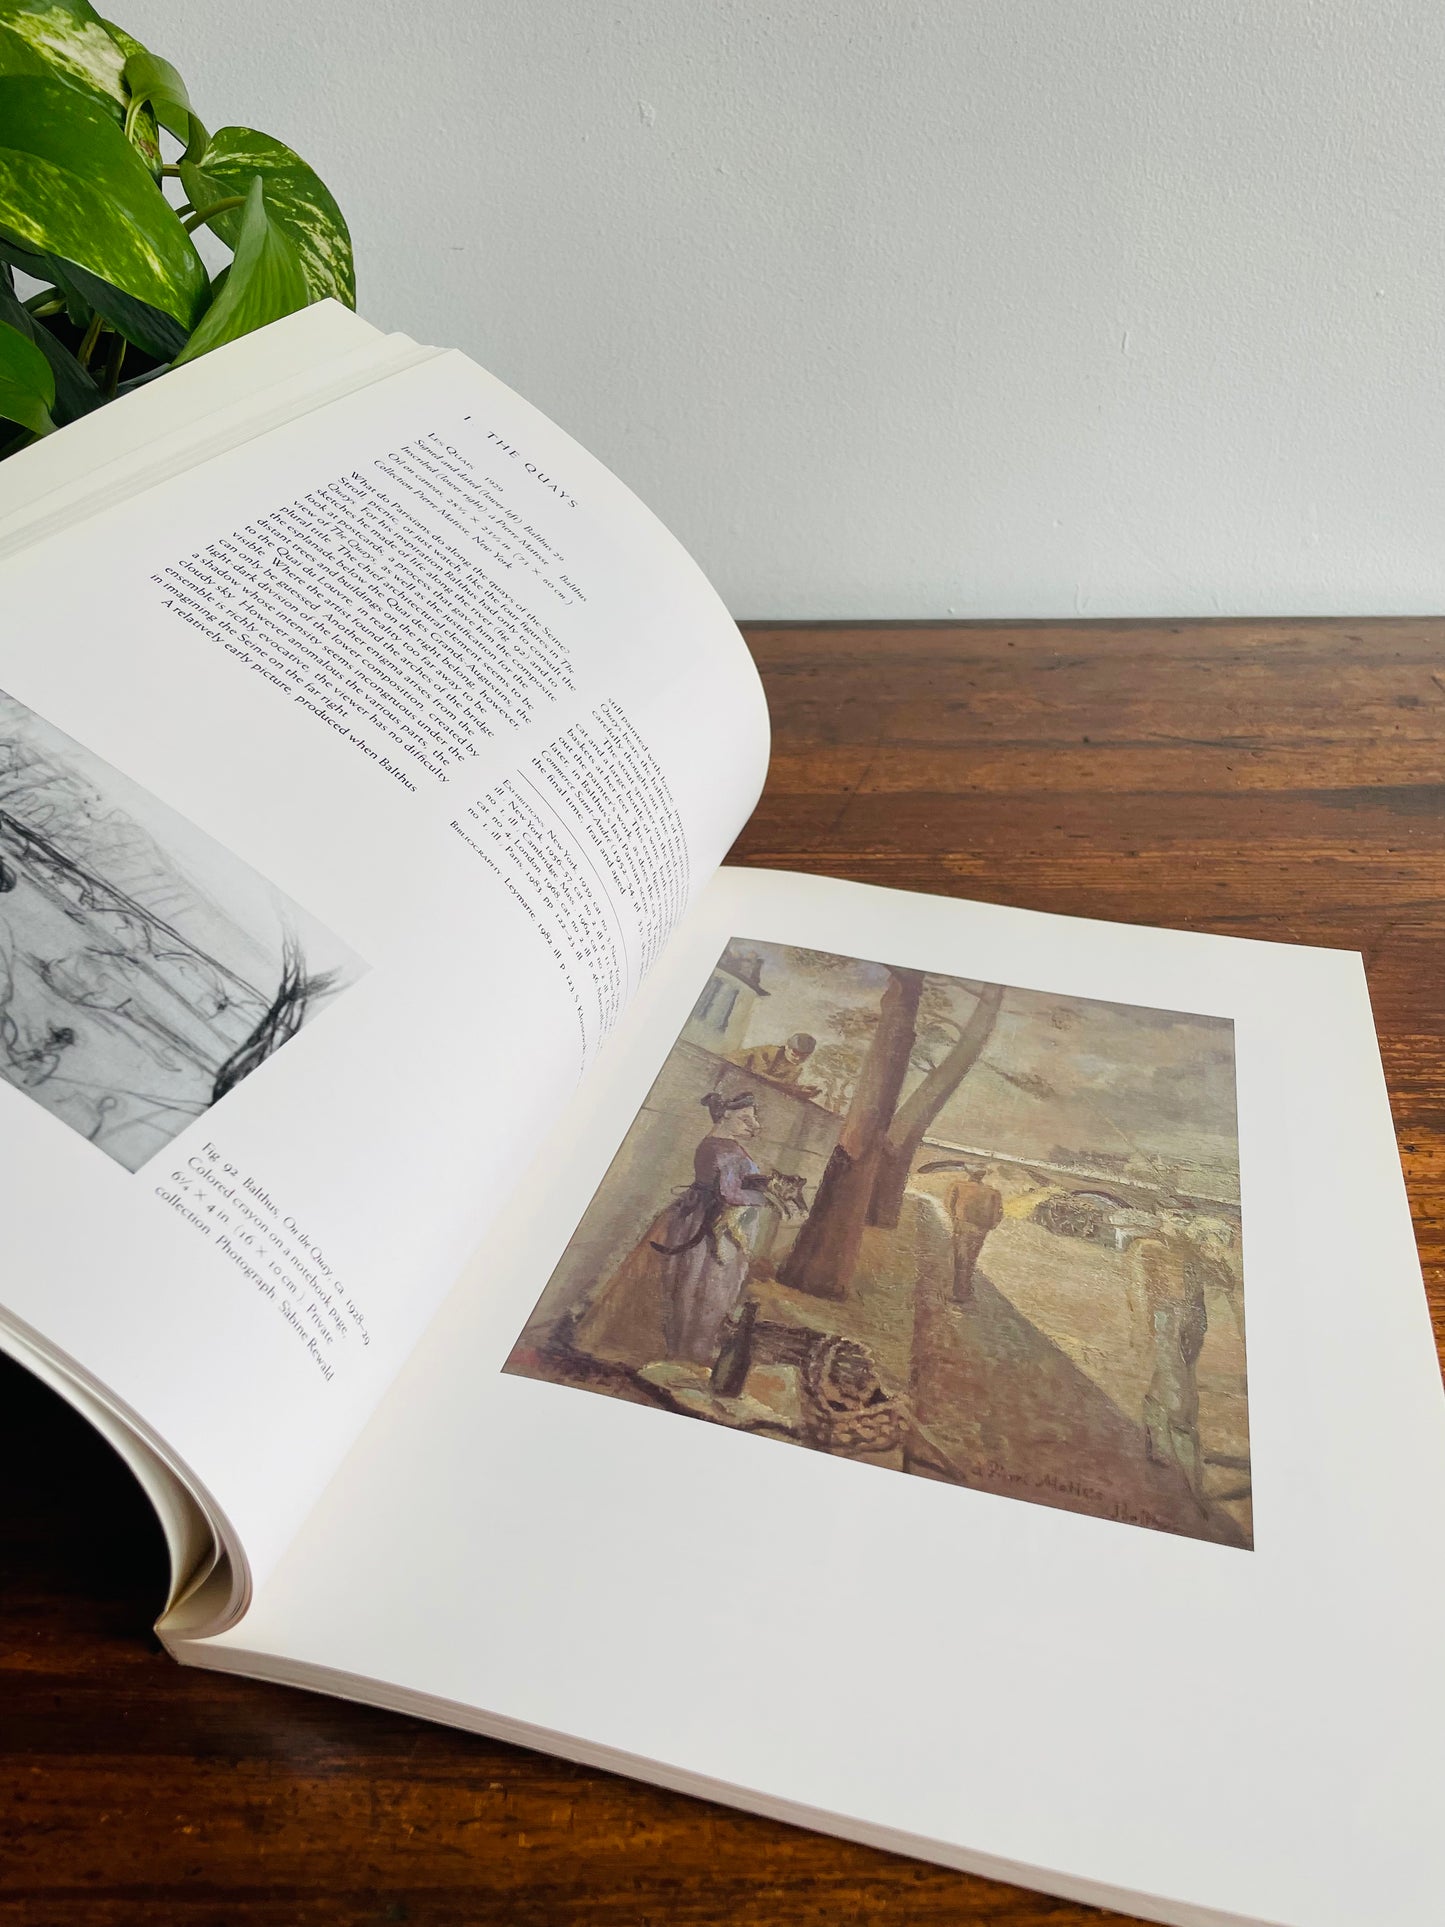 Balthus Book by Sabine Rewald and The Metropolitan Museum of Art New York (1984)